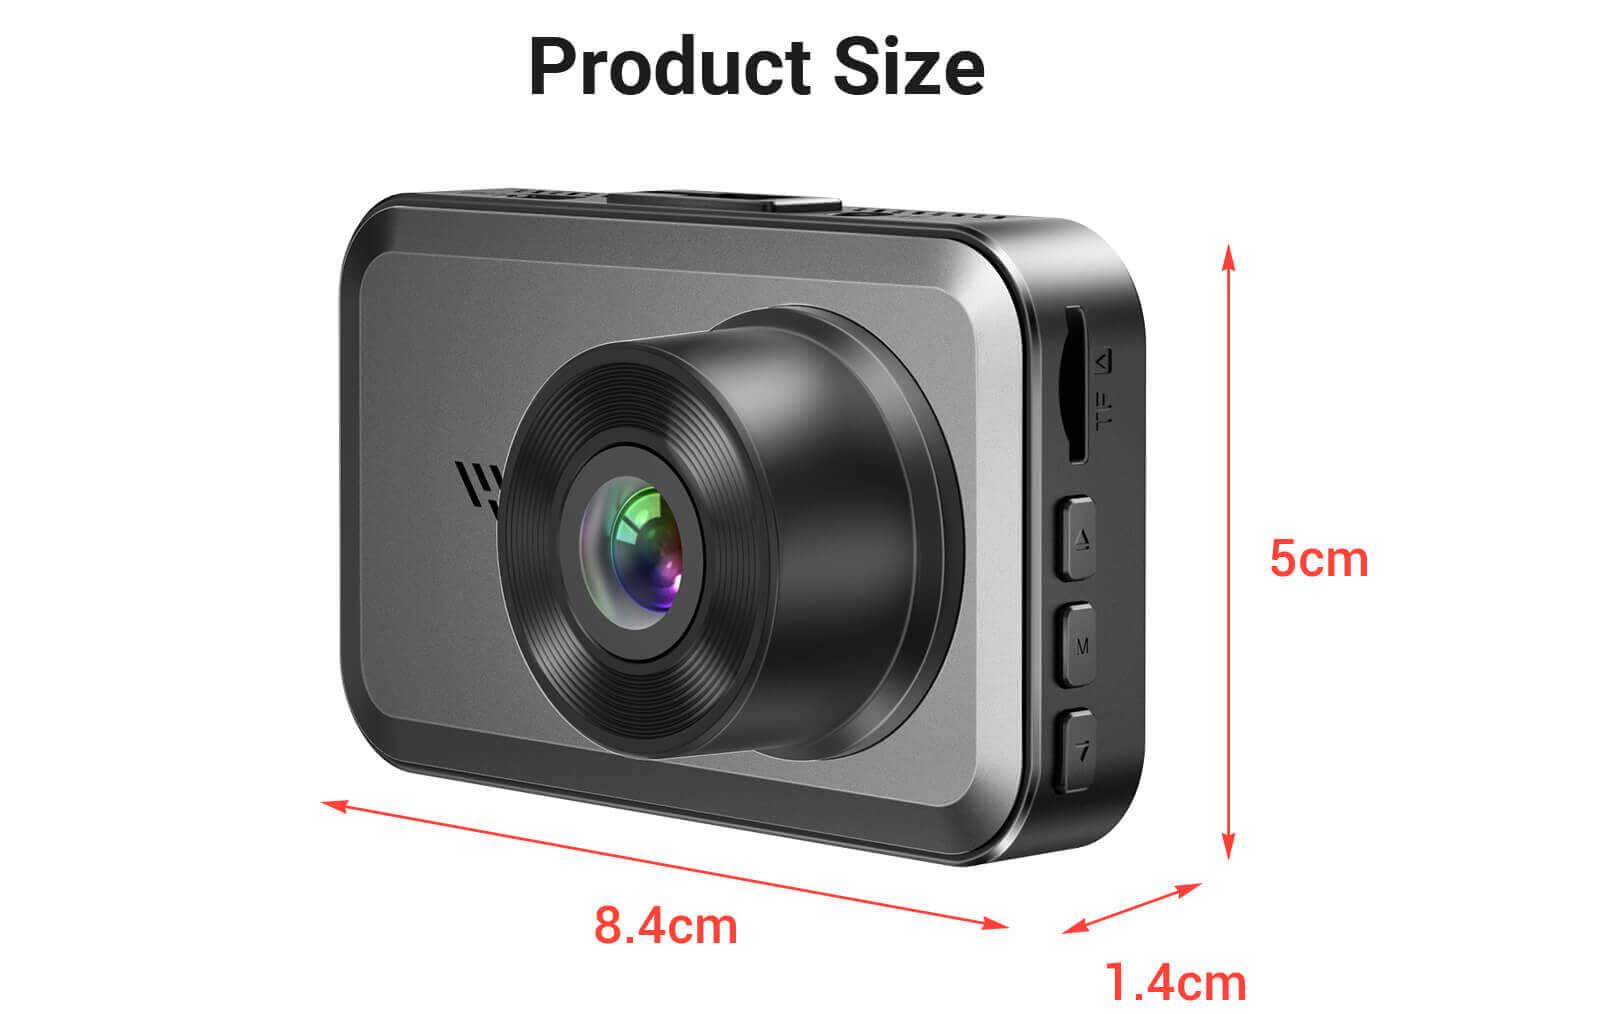 Cost-effective and Most worthwhile 4K Dash Cam Built in WiFi, GPS Car Dashboard Camera Recorder With Night Vision, Dual Lens, 3-inch Screen - XGODY 